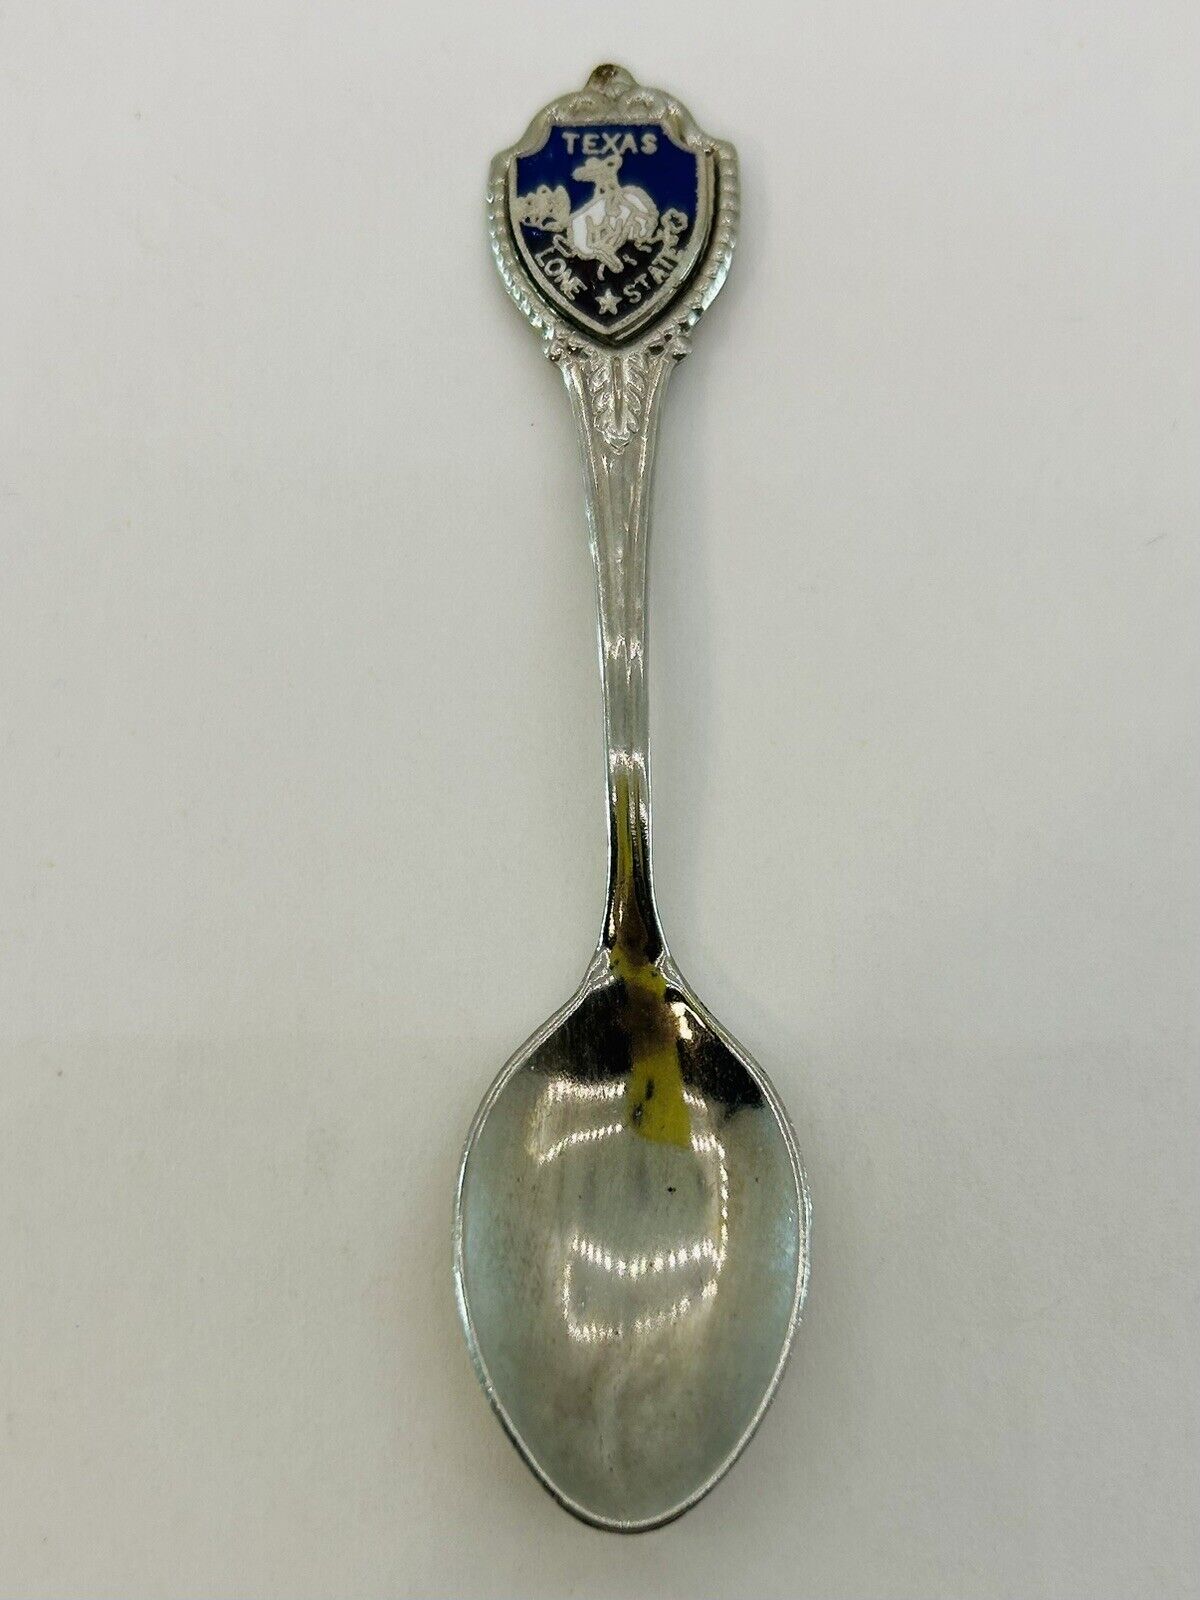 Vintage Souvenir Spoon US Collectible Texas Lone Star State